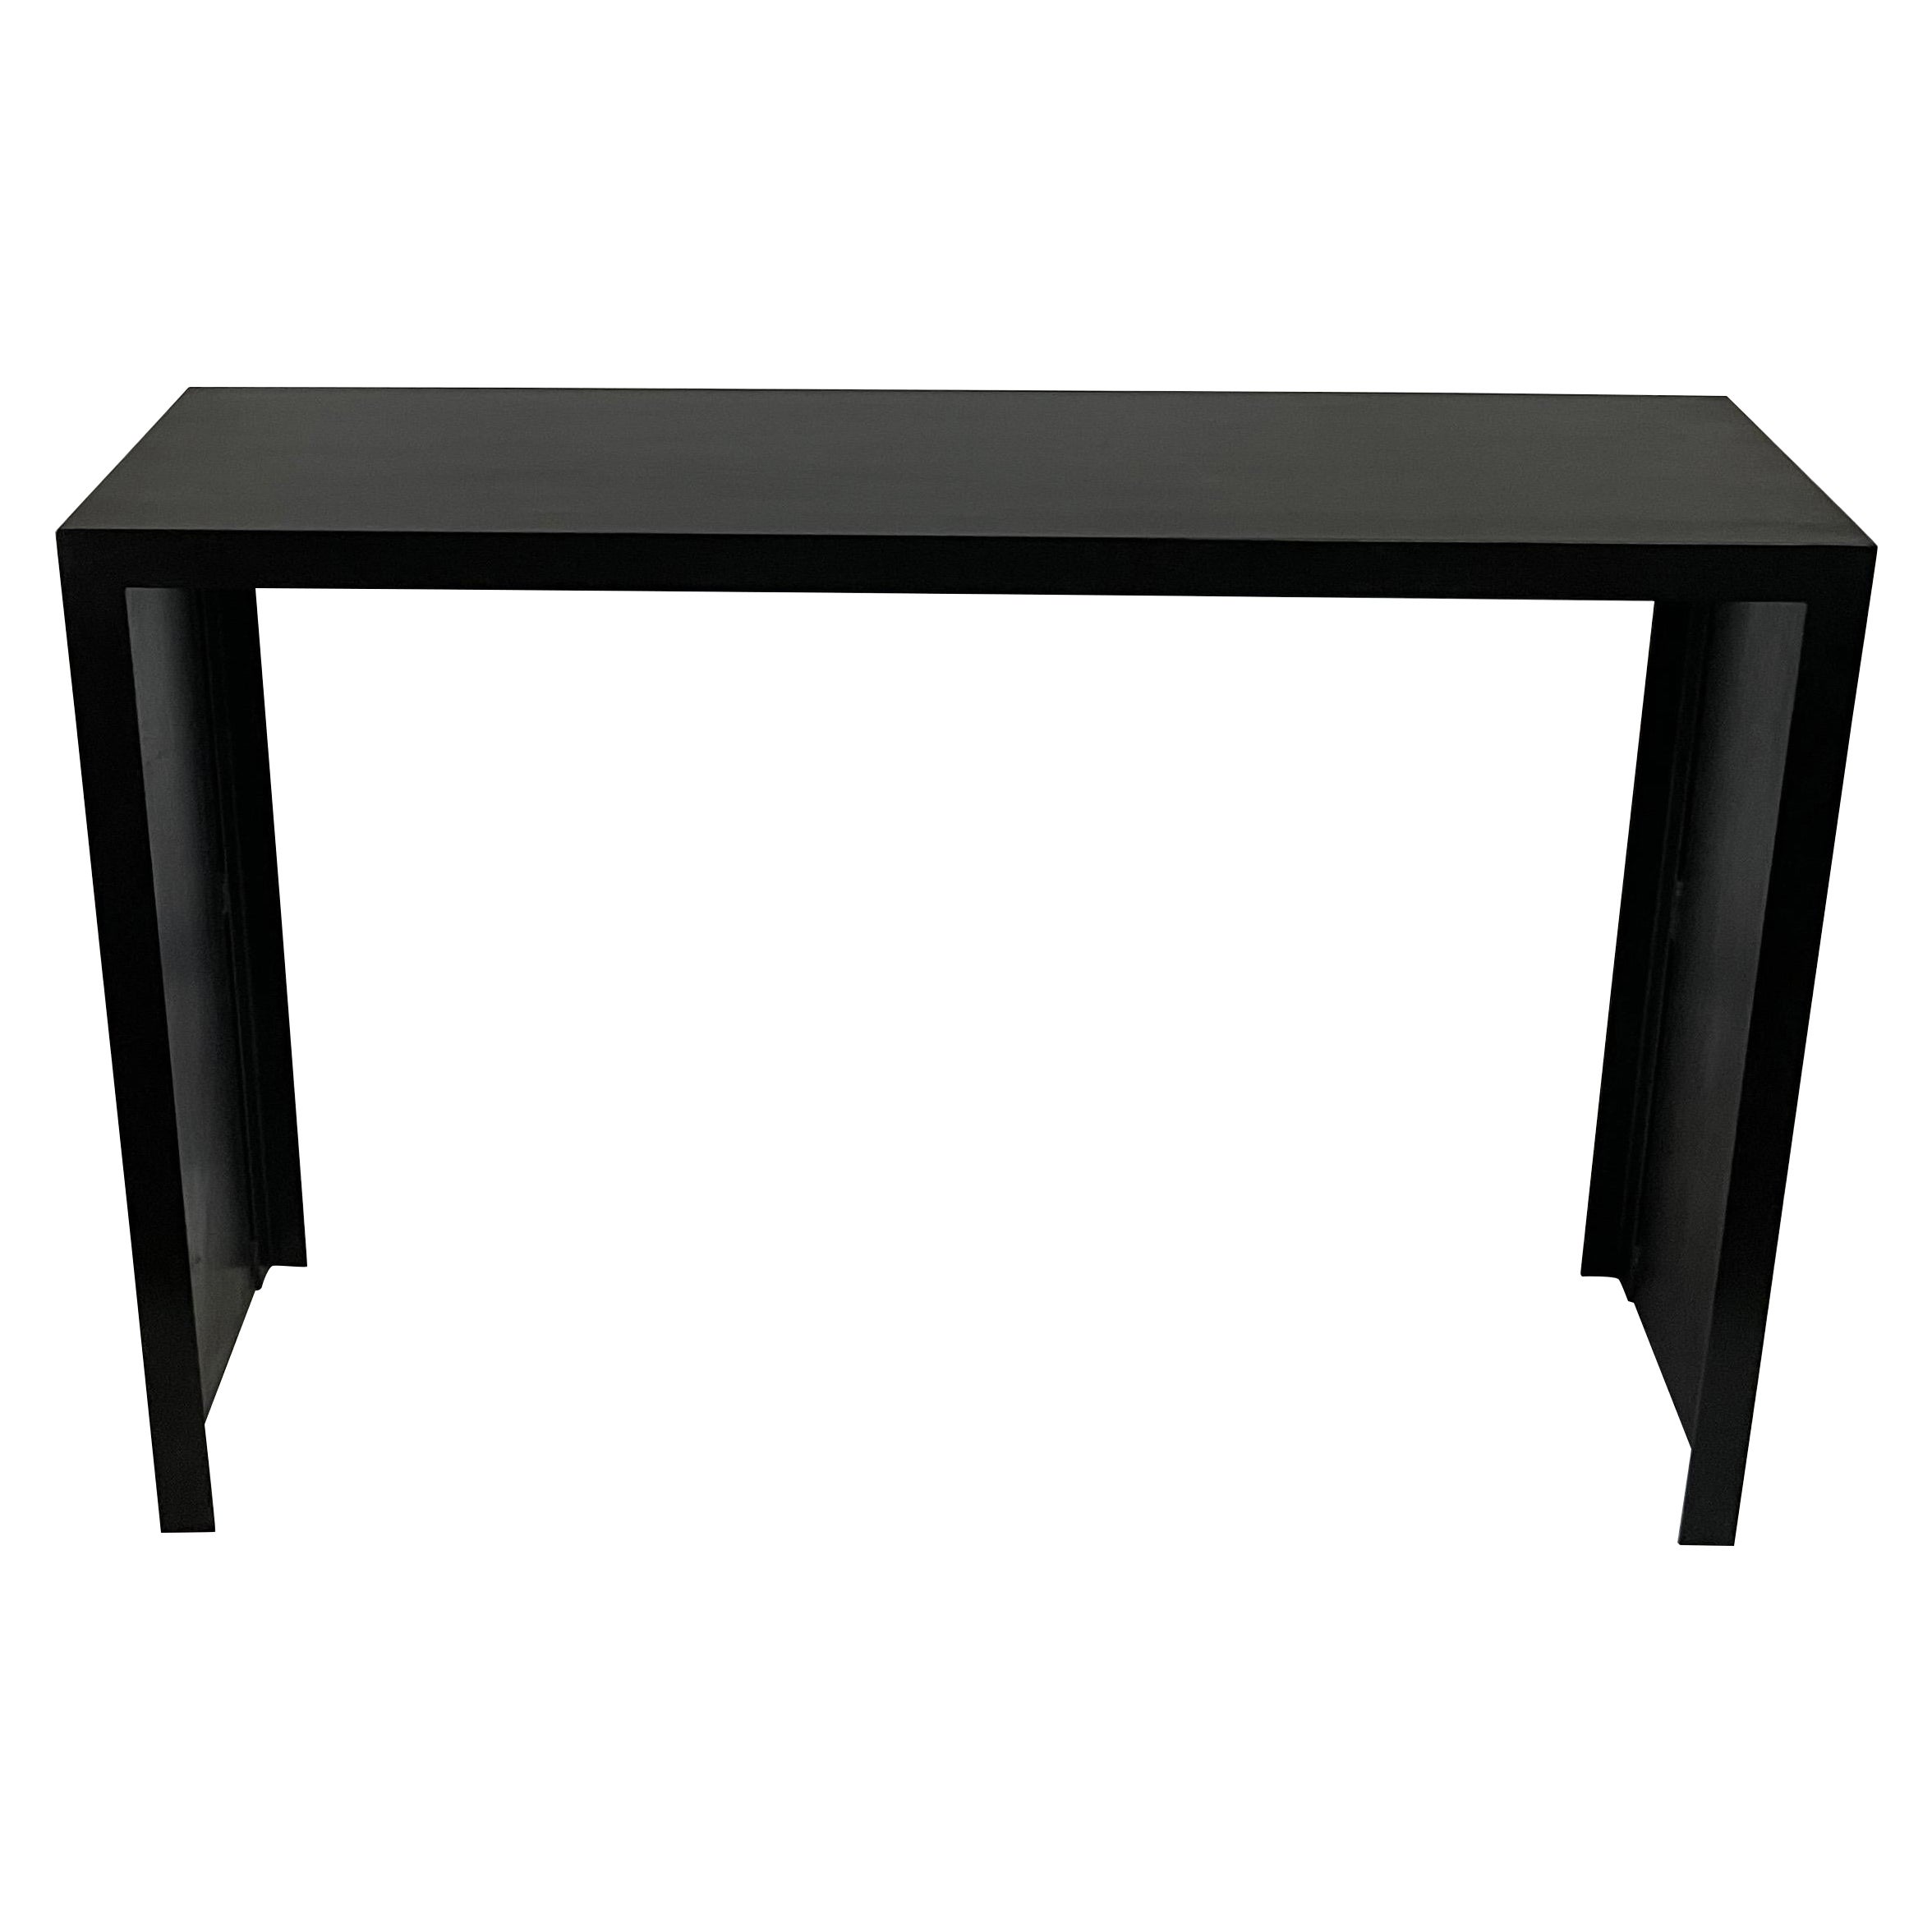 JMF Style Blackened Iron Console For Sale